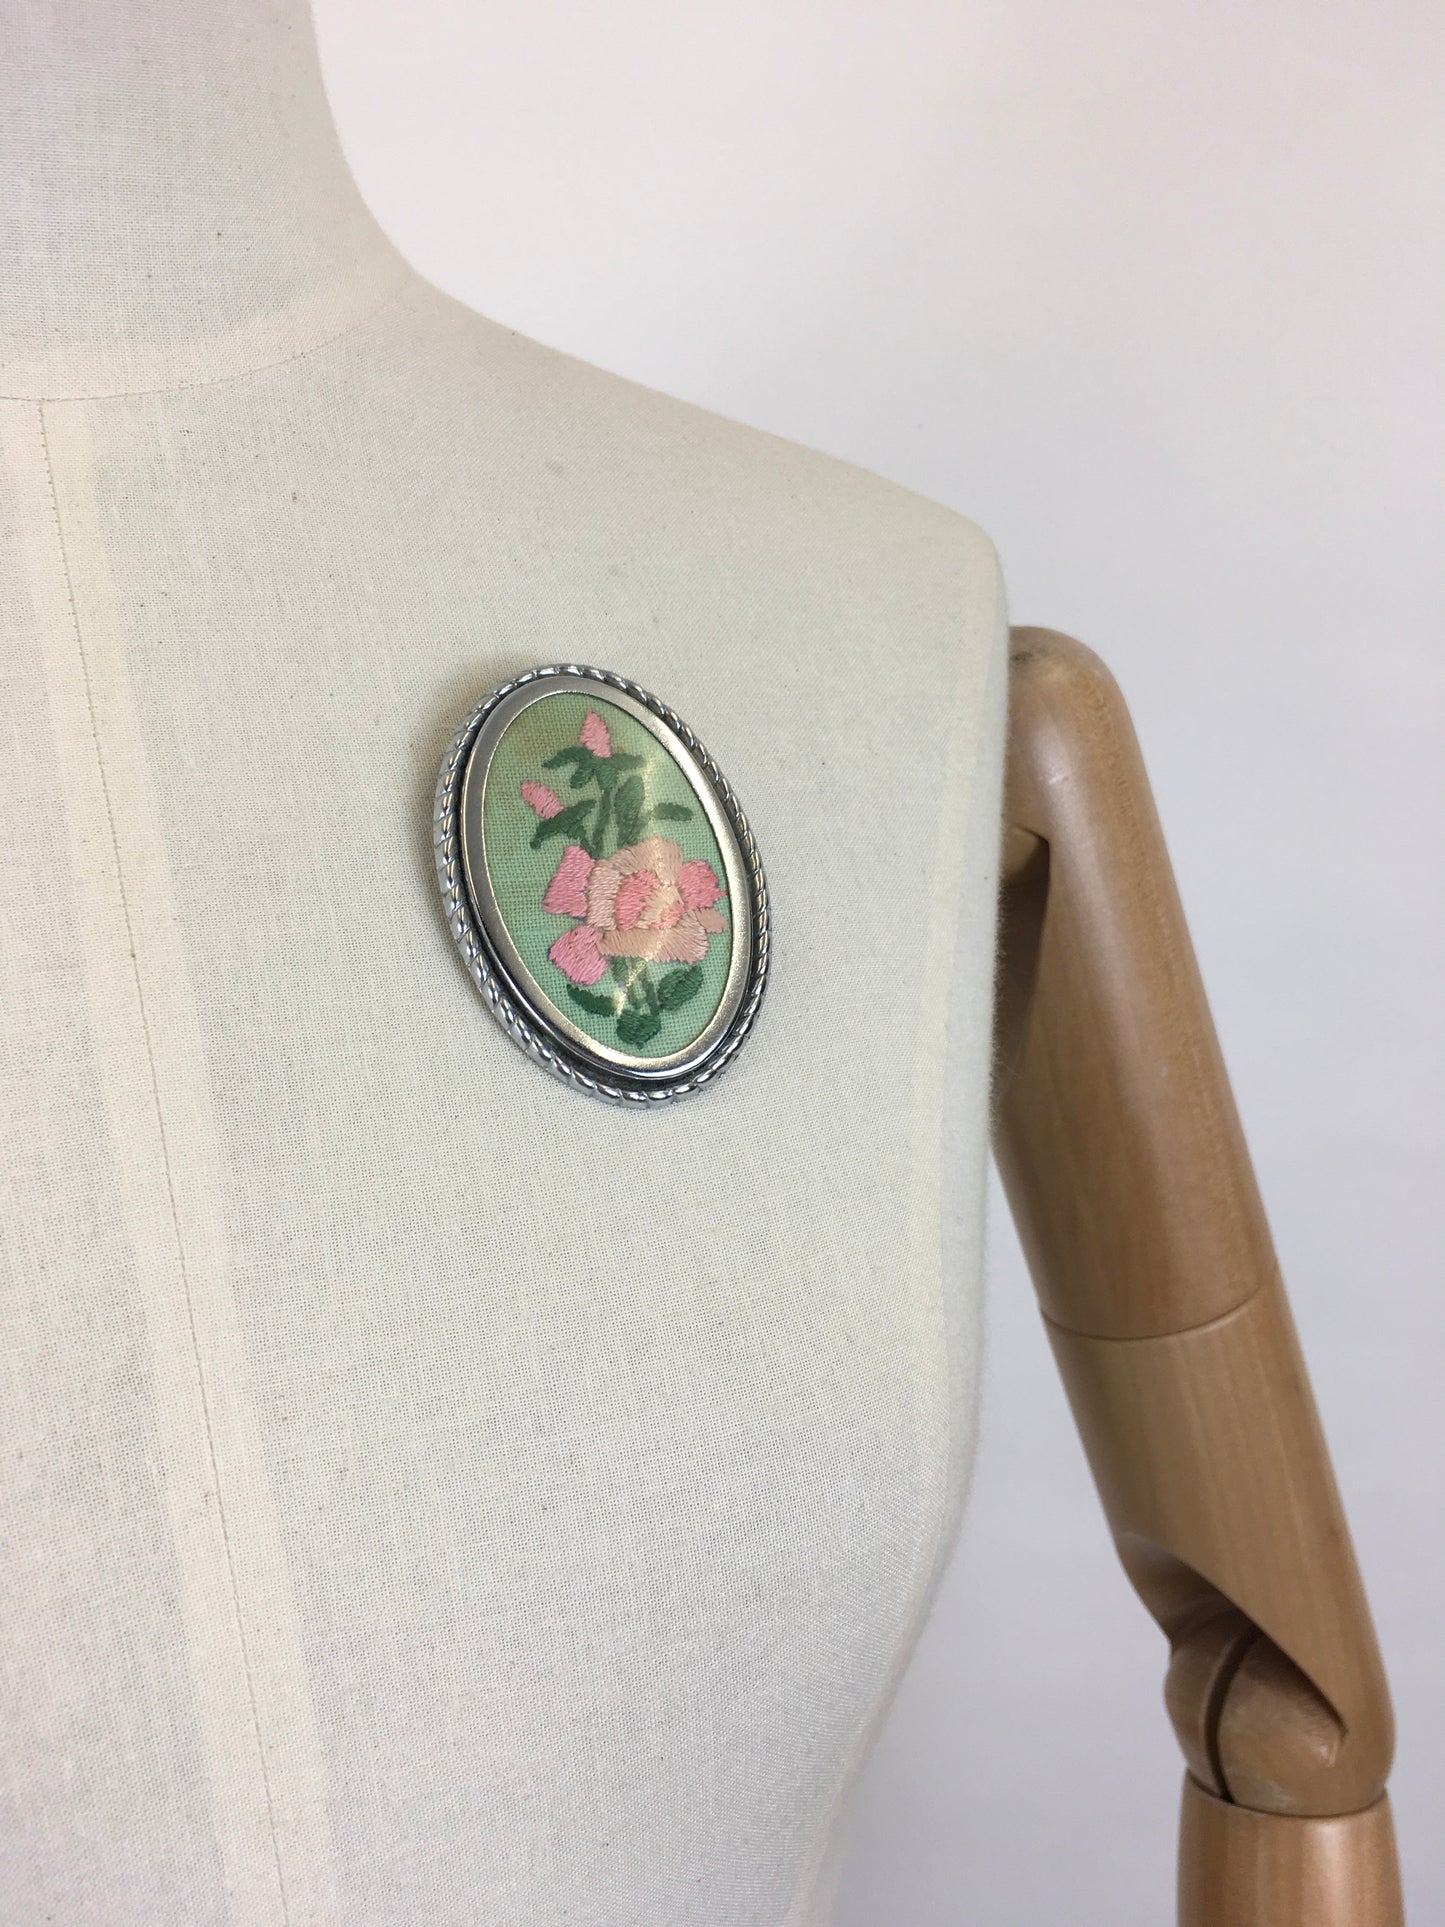 Original 1940’s / 1950’s Beautiful Floral Embroidered Brooch - In Springtime Touches of Pastel Pinks and Mint Green